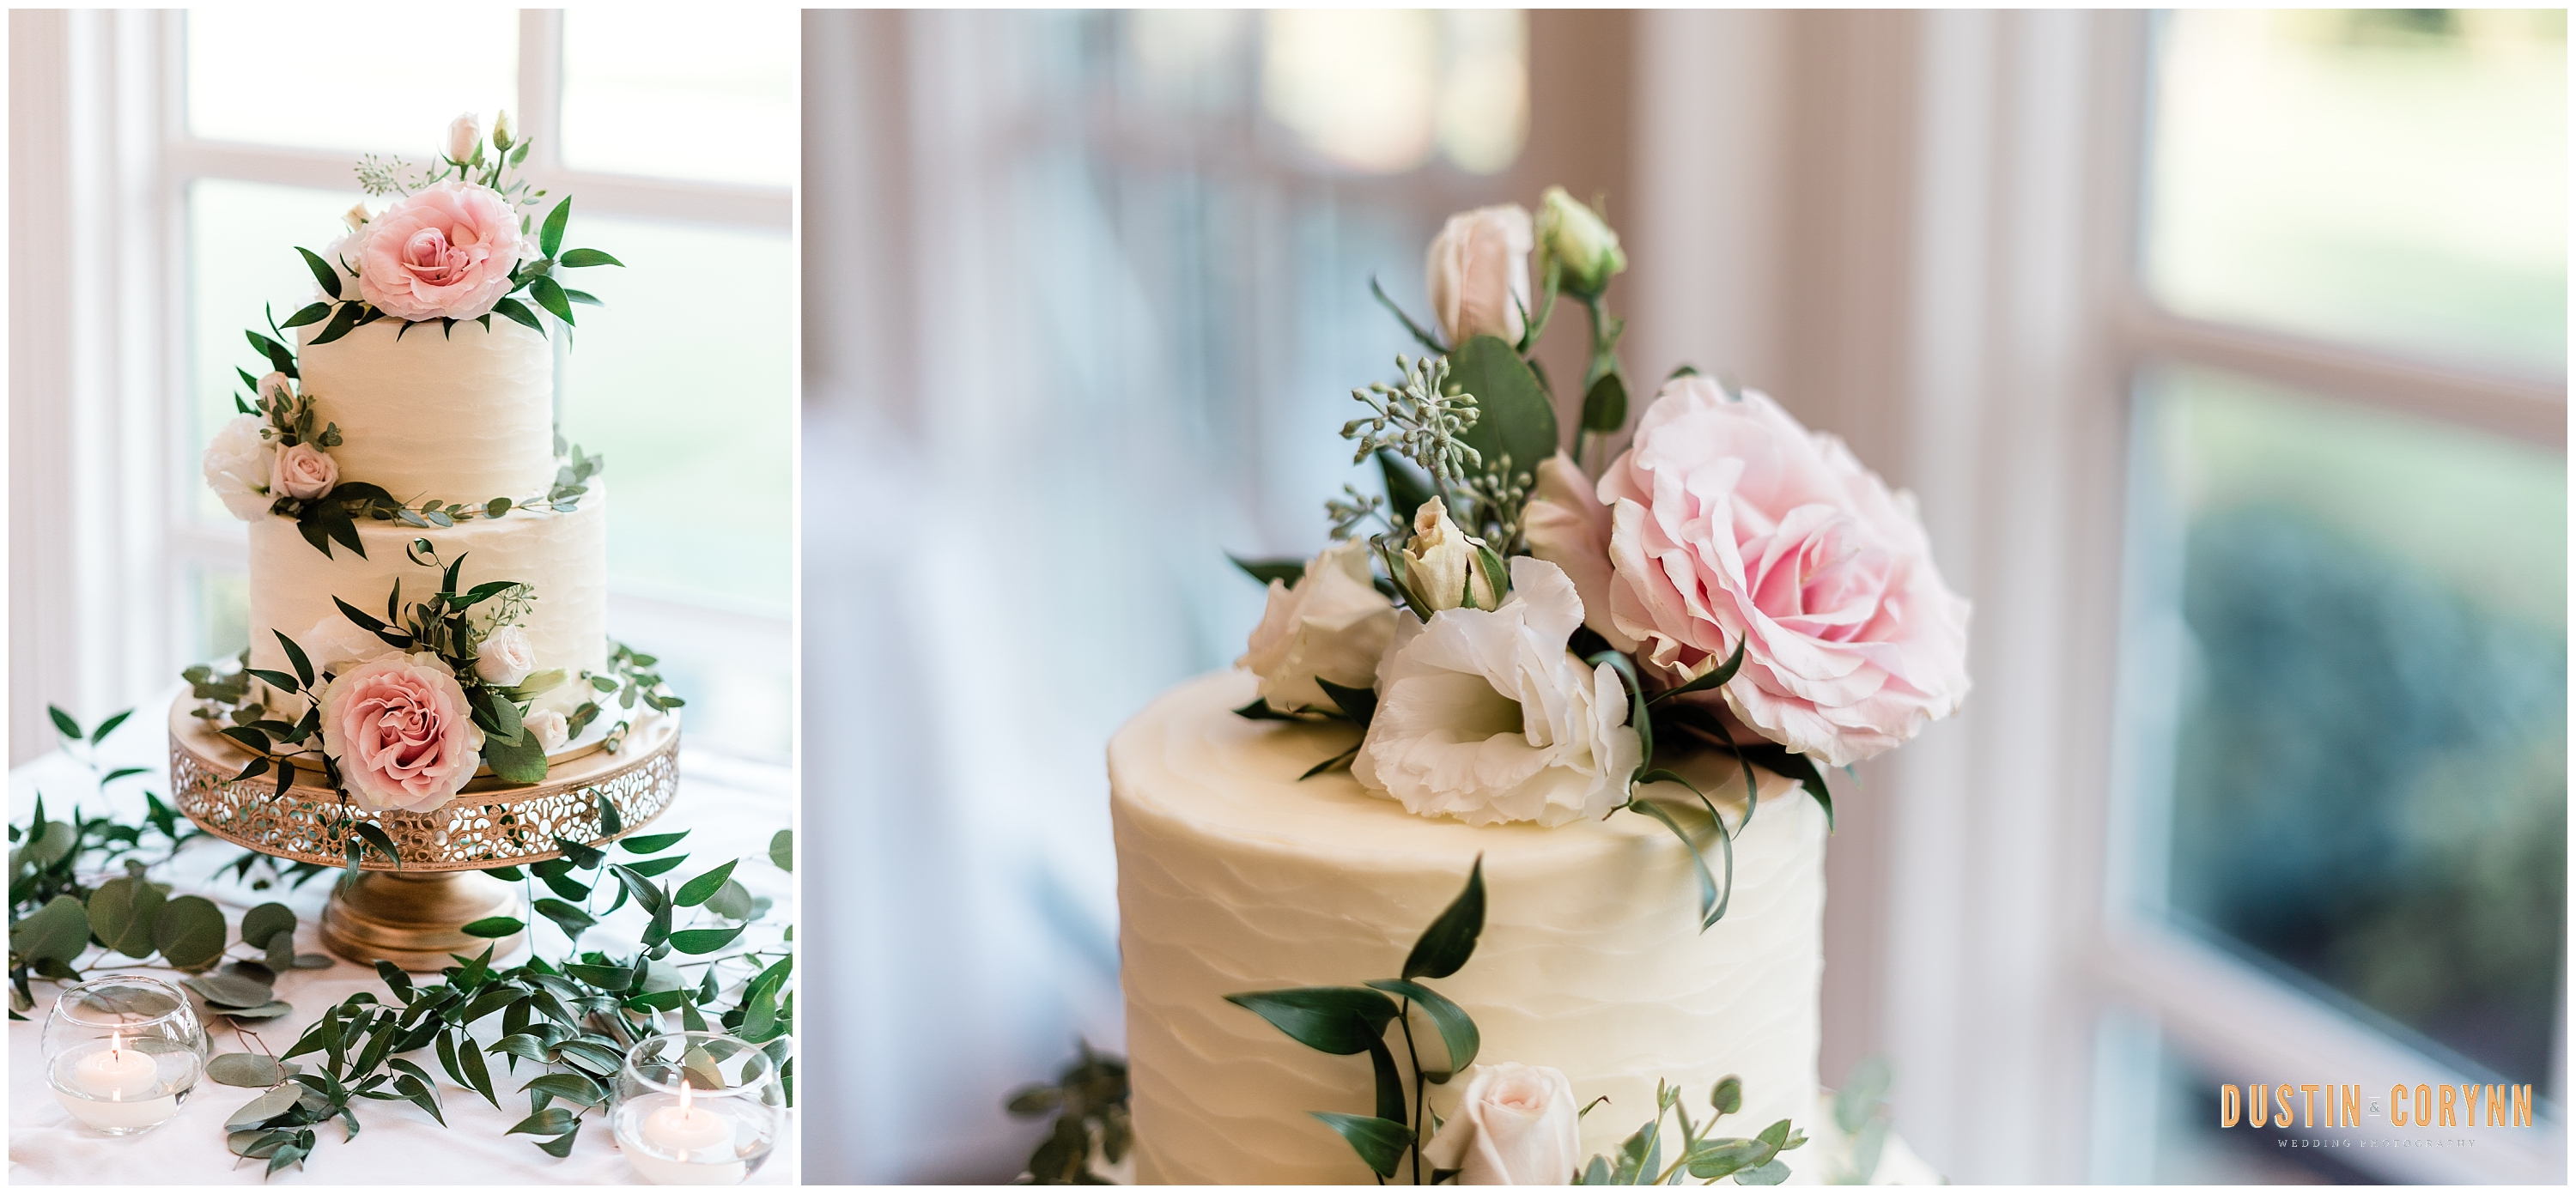 Fort Wayne wedding photographer captures beautiful 3 tiered white wedding cake with flowers and greenery